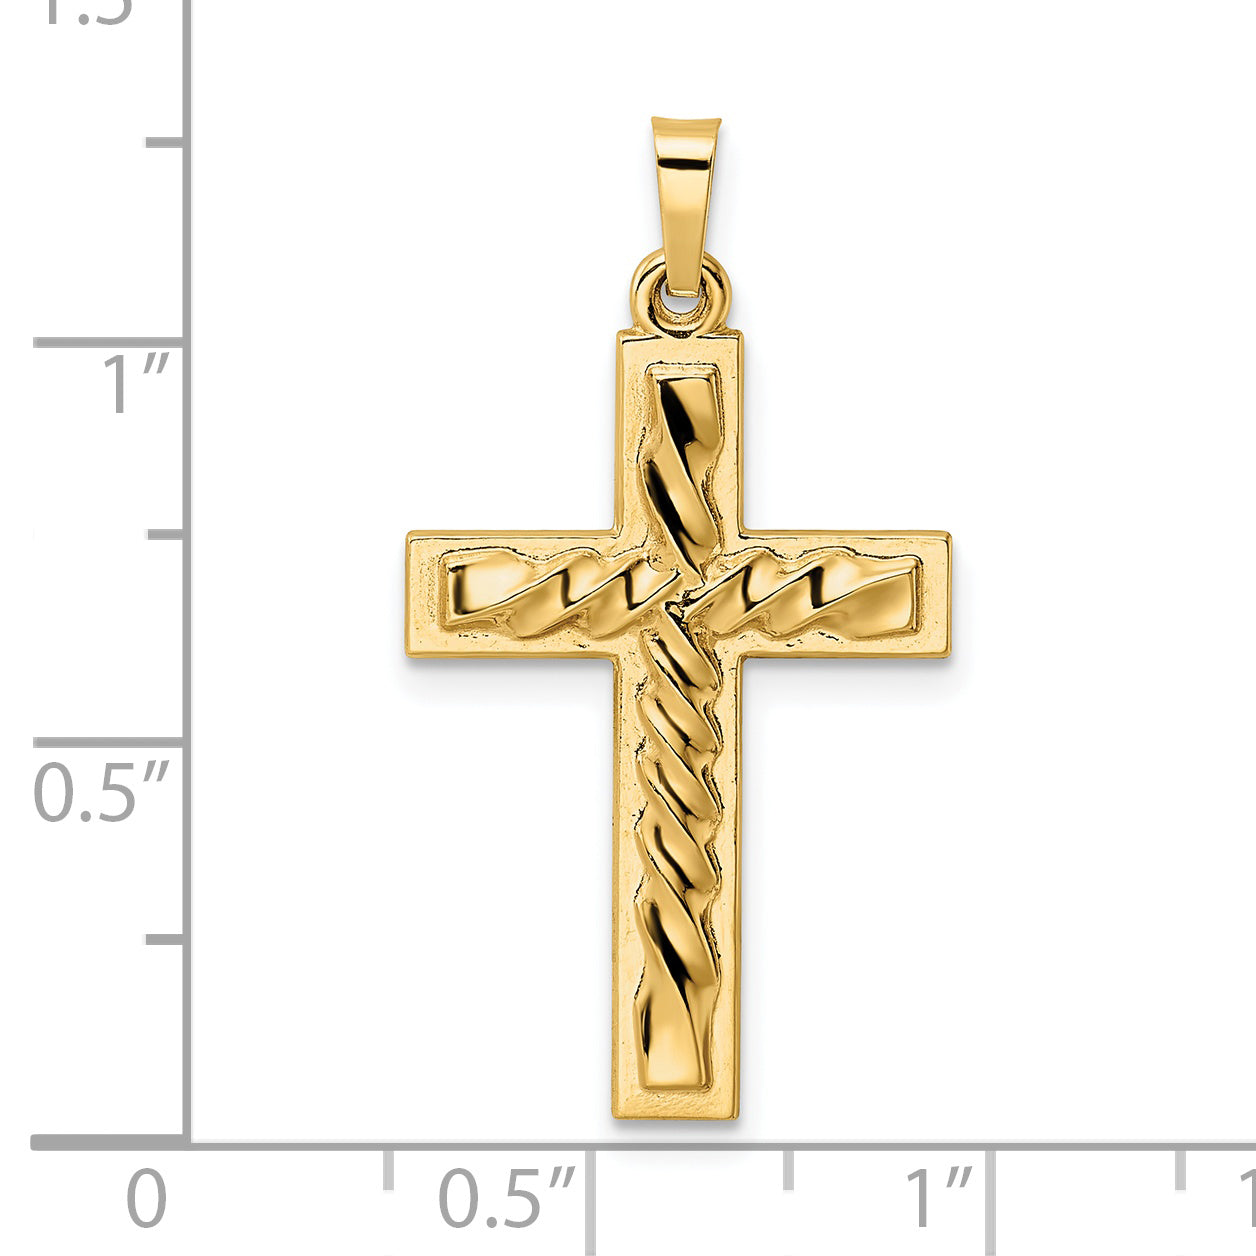 14k Polished and Twisted Hollow Cross Pendant